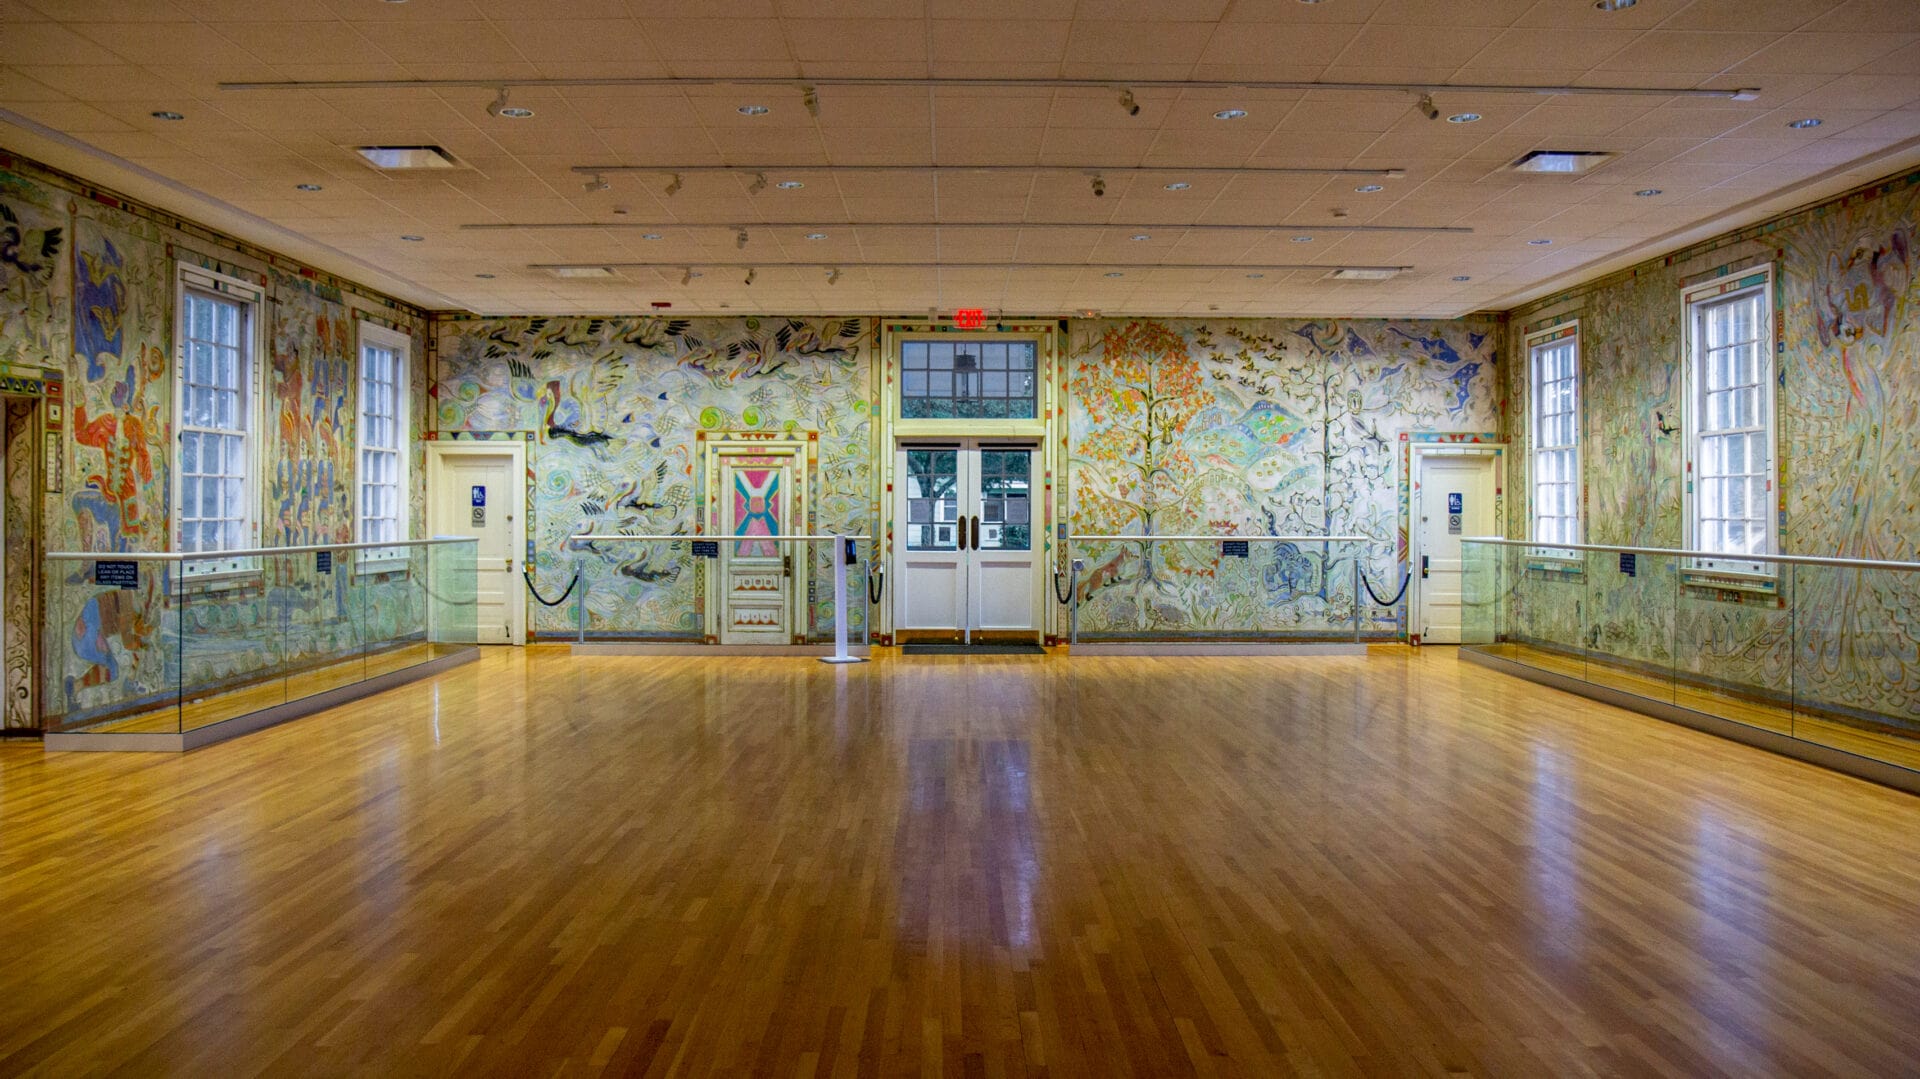 a large, empty room with shiny hardwood floors and colorfully painted walls